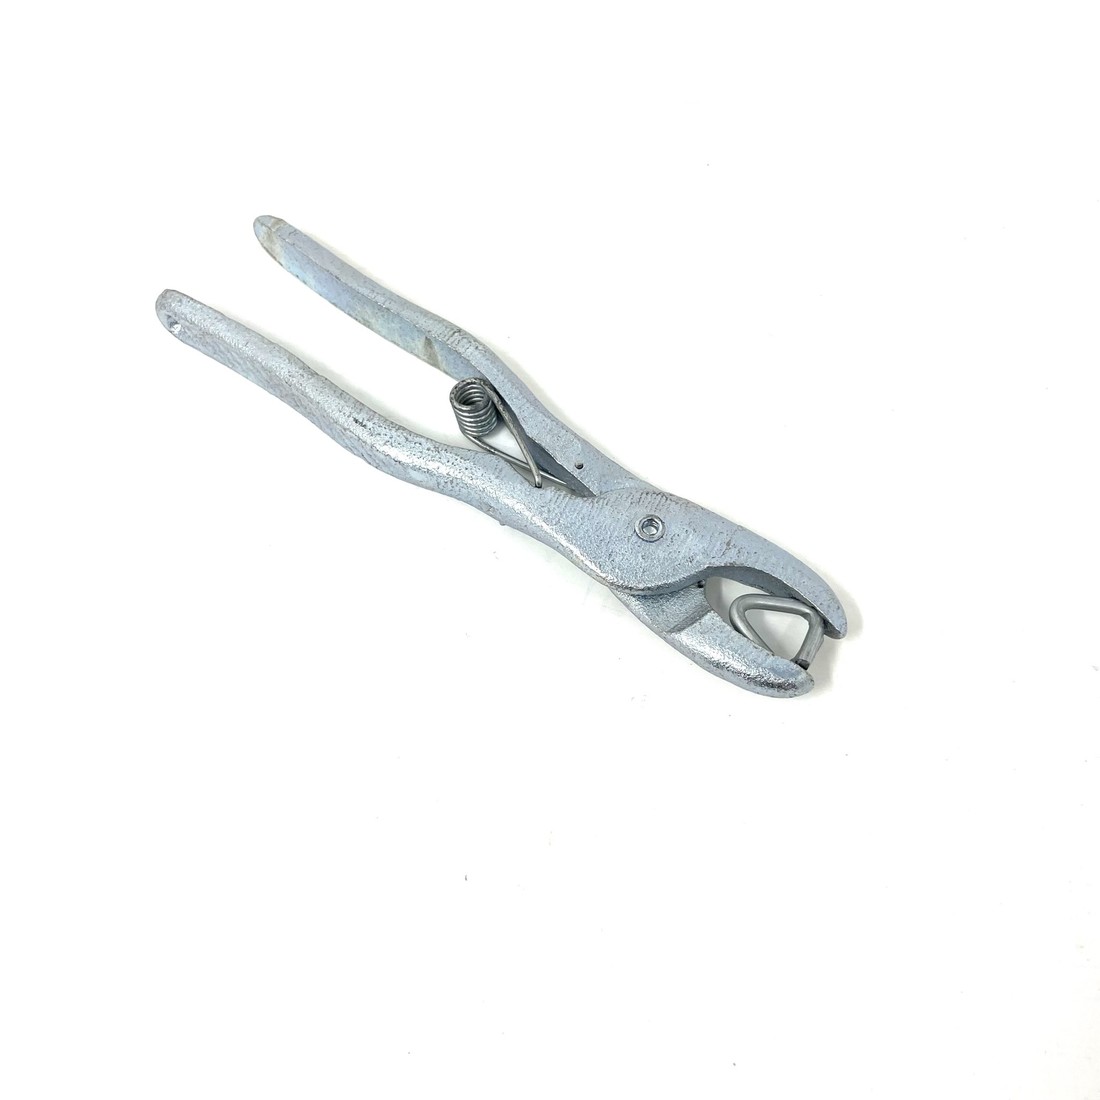 G7 11/16th Hog Ring Pliers — The Benner Deer Fence Company